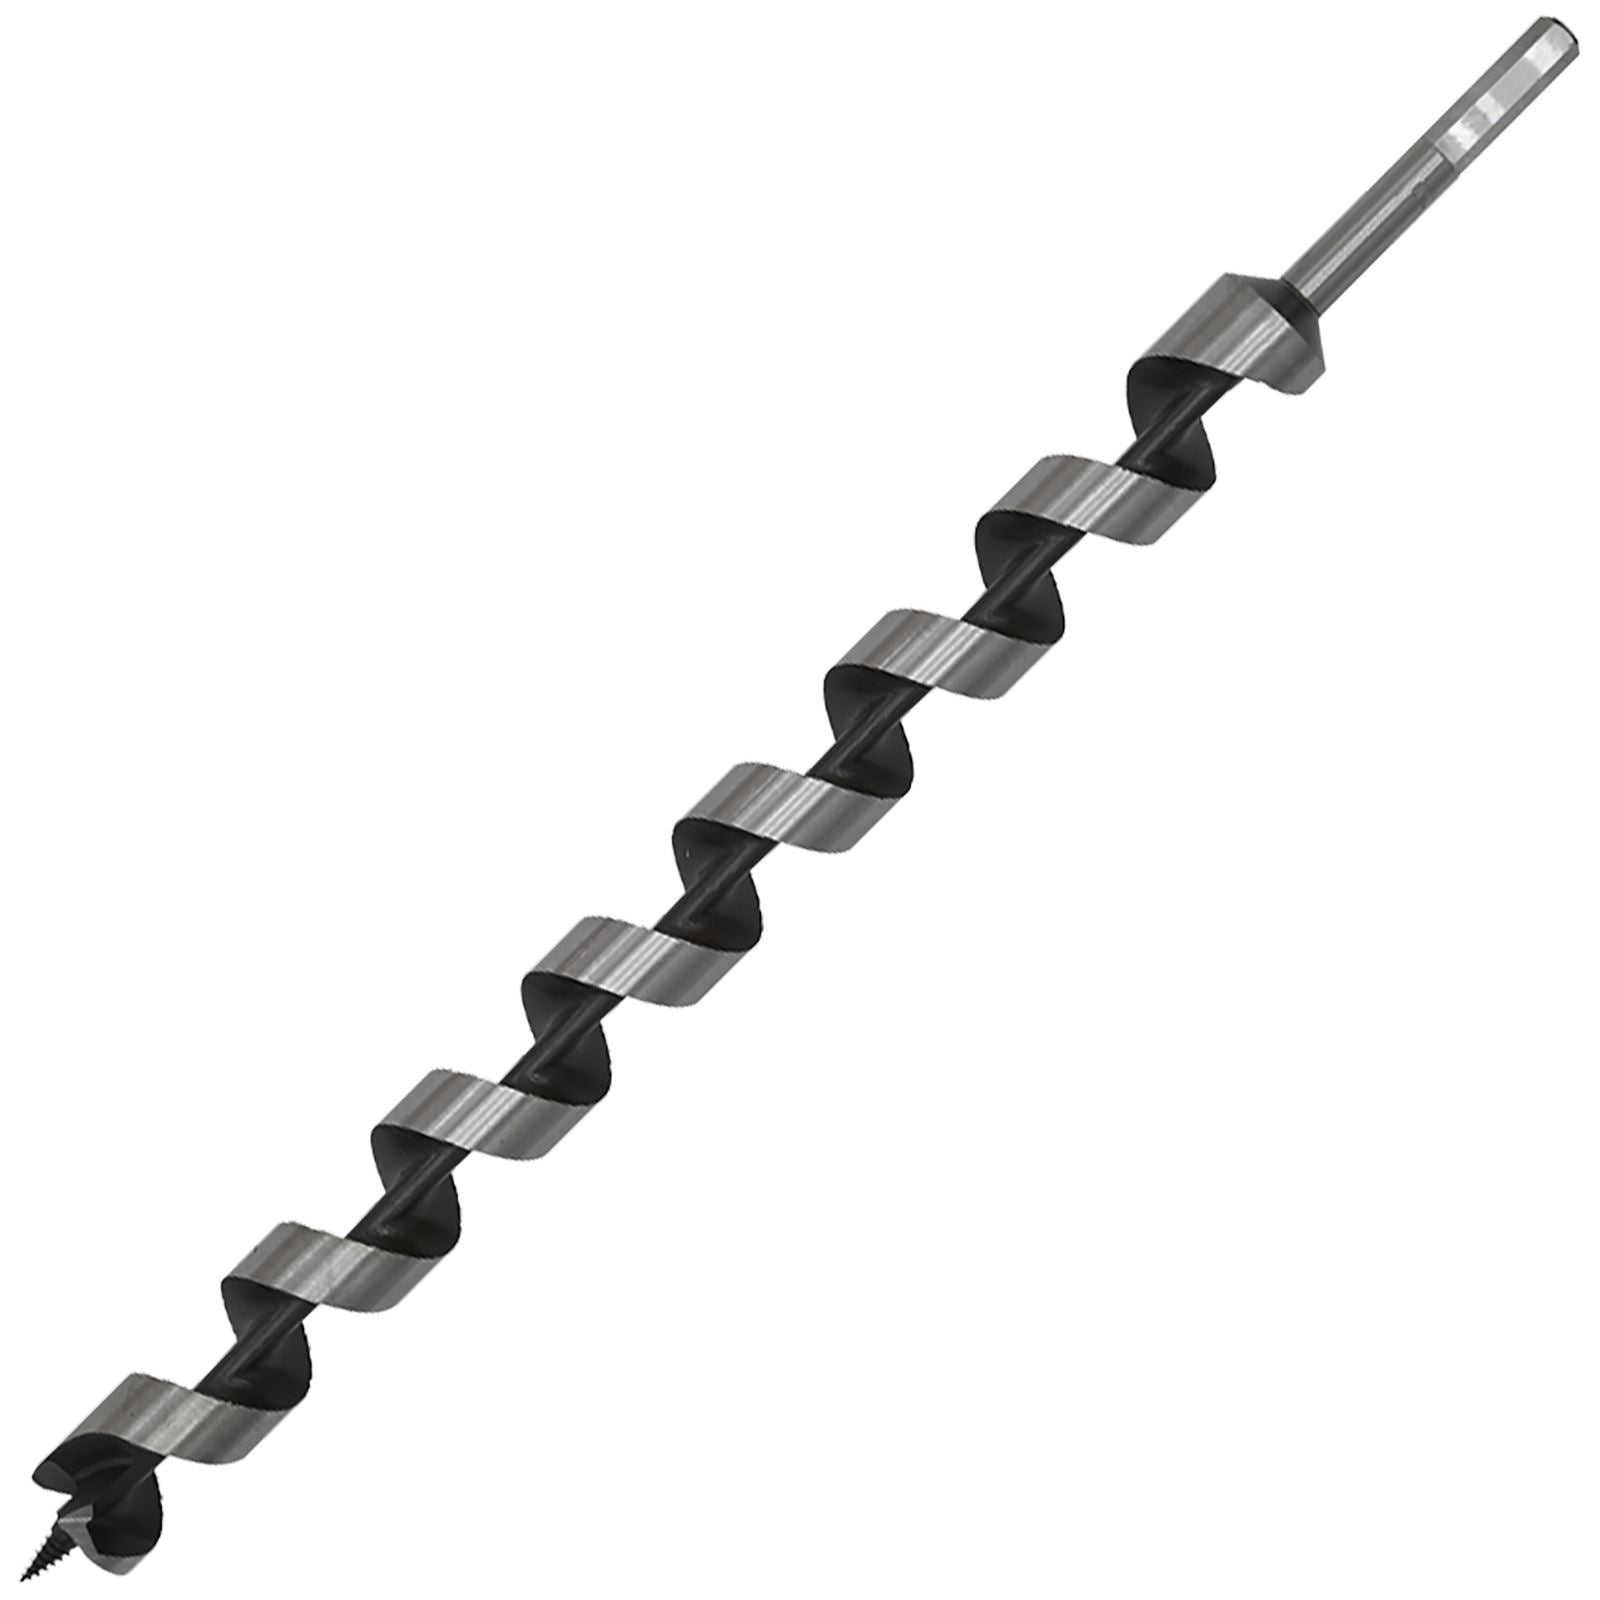 Worksafe by Sealey Auger Wood Drill Bit 30mm x 460mm